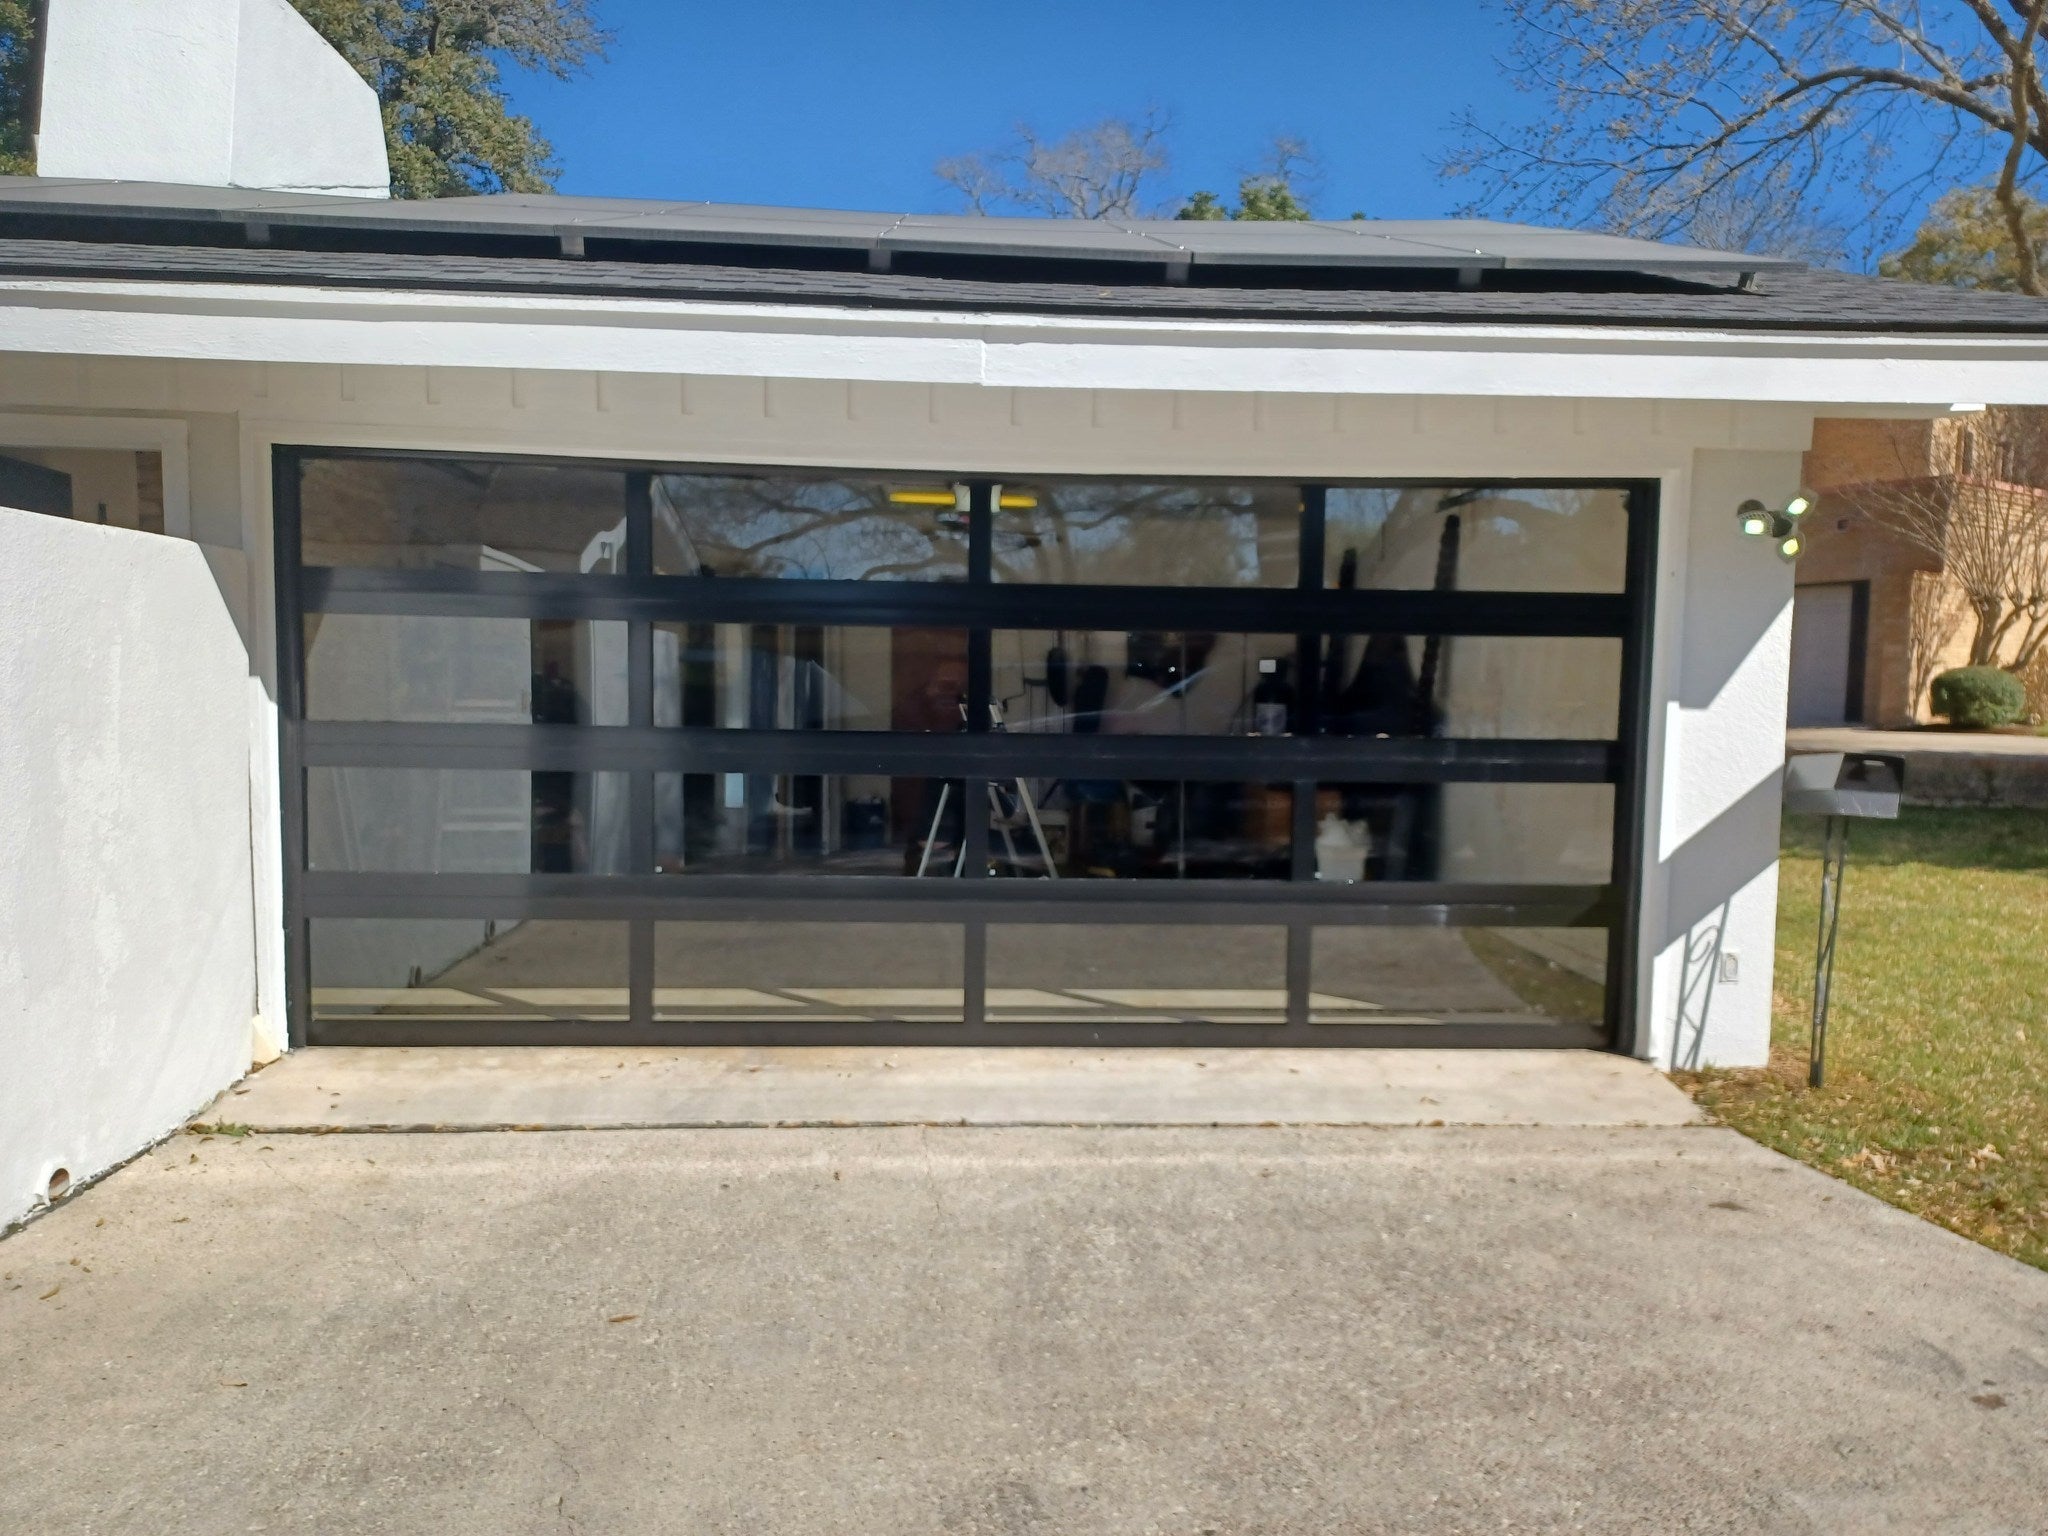 16 FT Wide By 10 FT Tall Full View Garage Door Matt Black Finish With Clear Glass